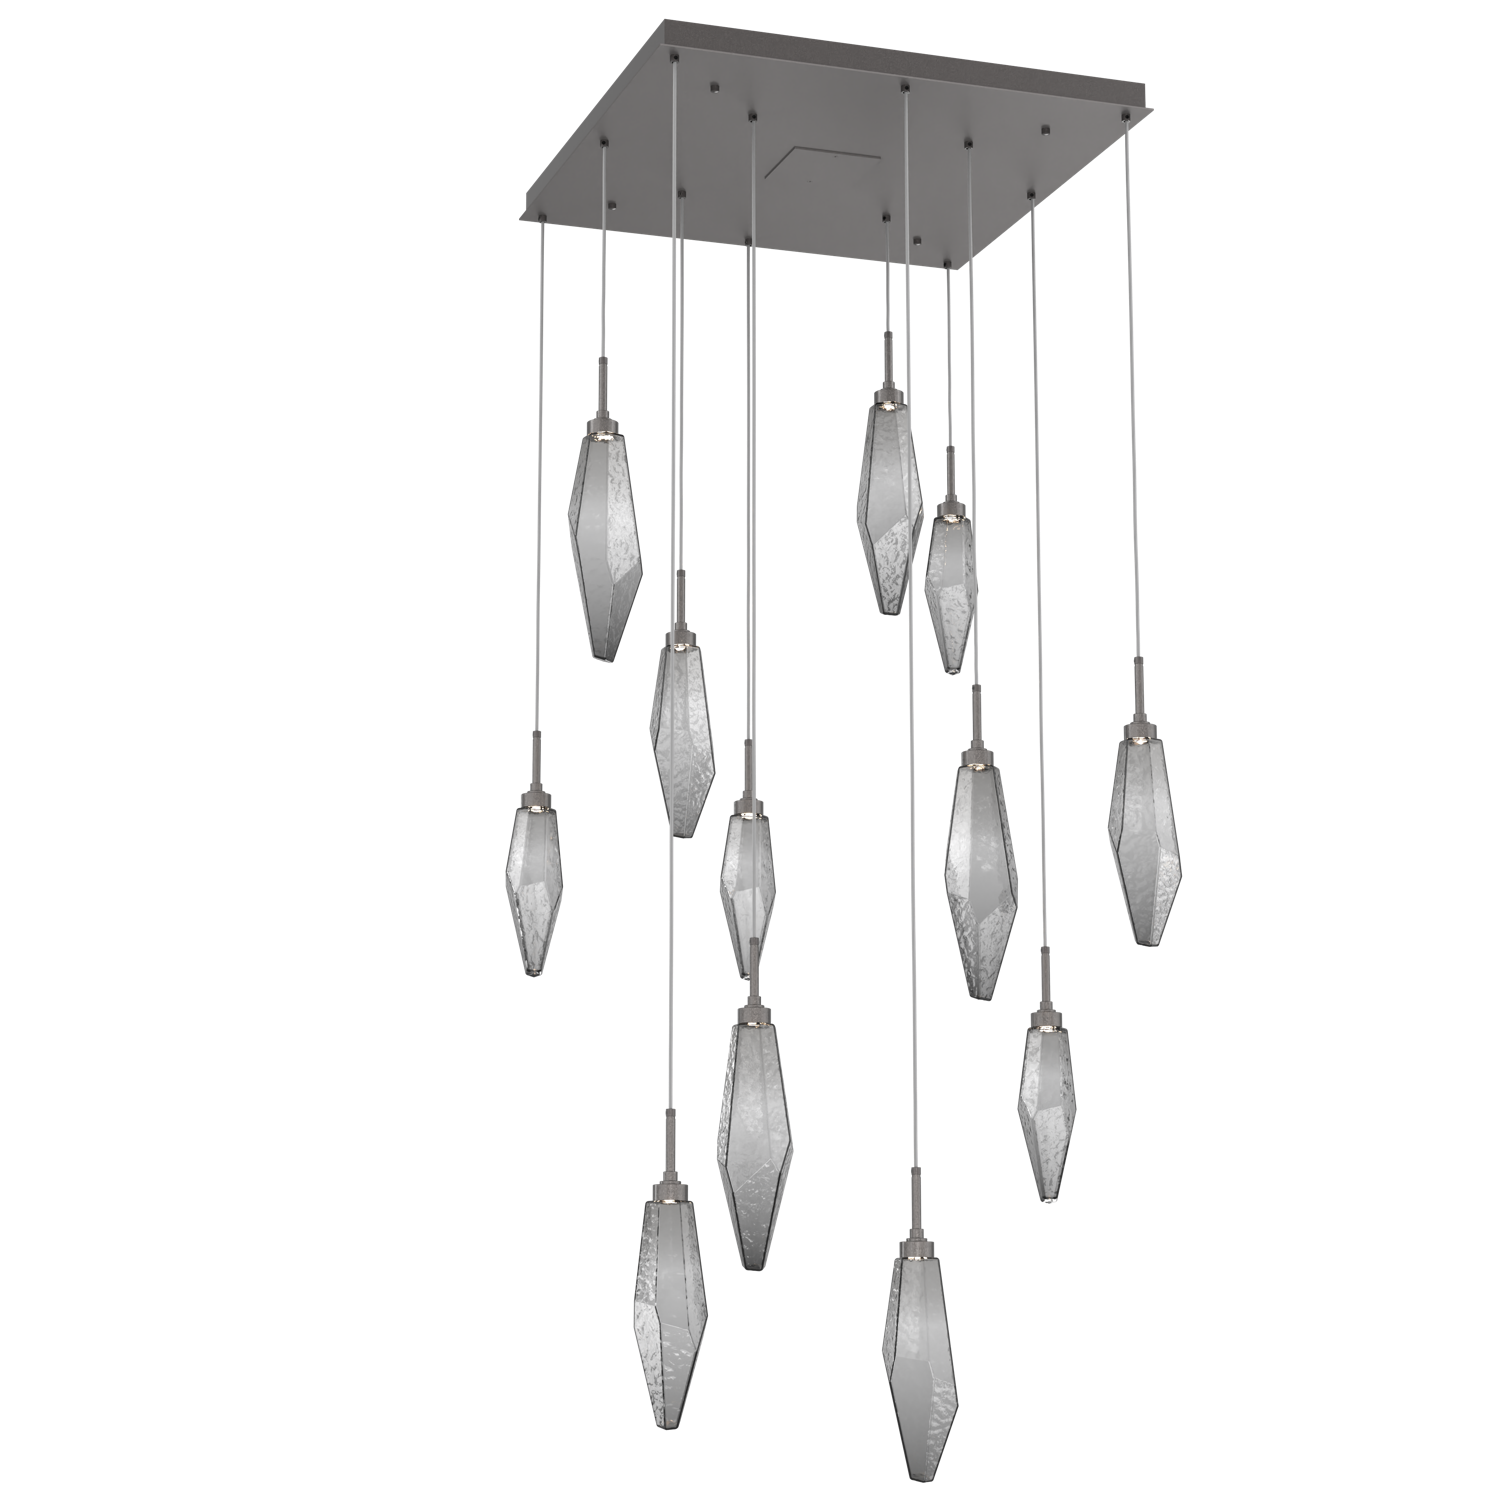 CHB0050-12-GP-CS-Hammerton-Studio-Rock-Crystal-12-light-square-pendant-chandelier-with-graphite-finish-and-chilled-smoke-glass-shades-and-LED-lamping